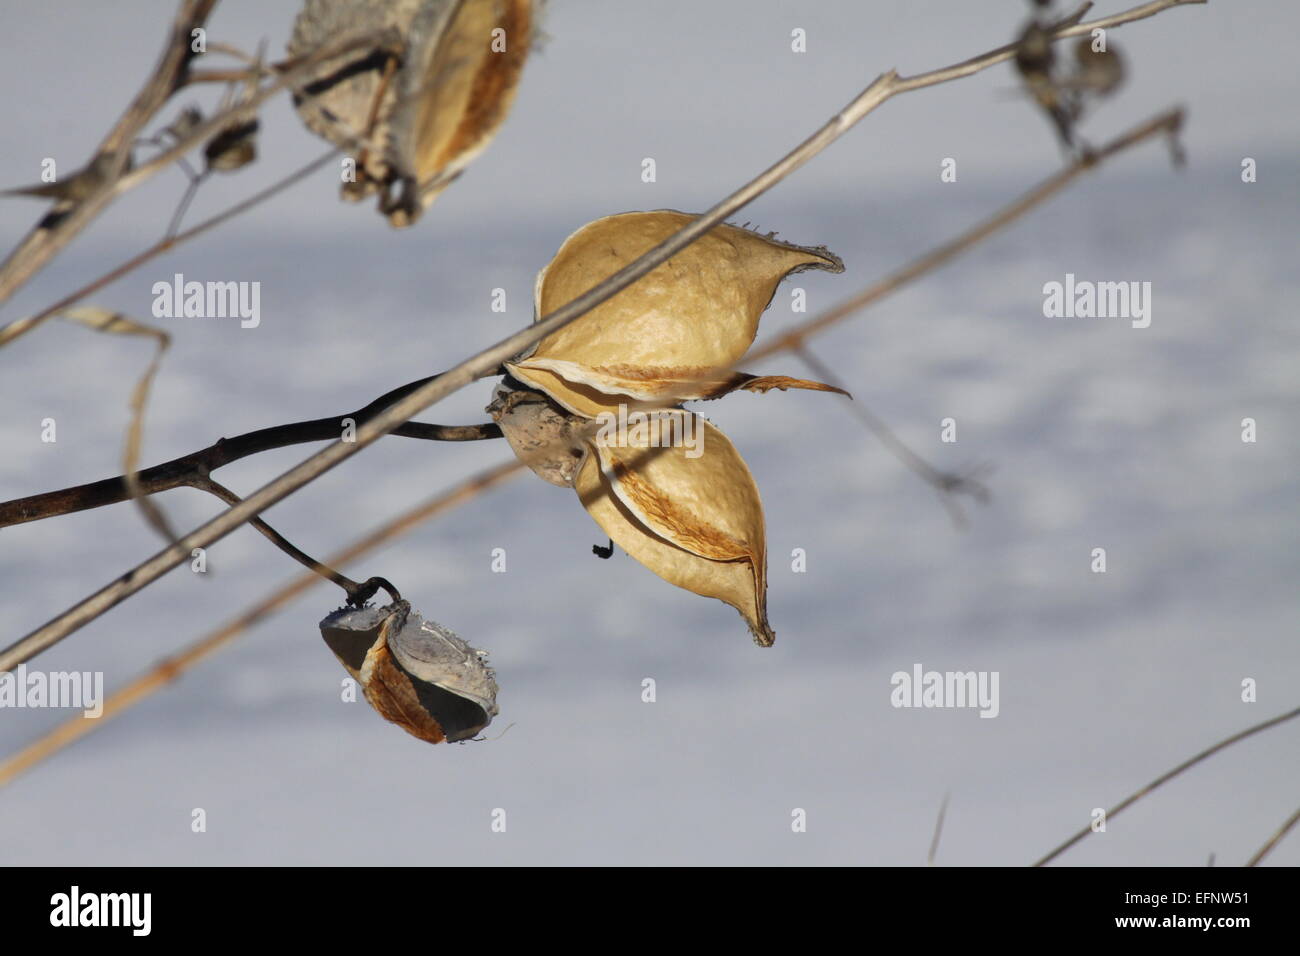 The Dried Stalk And Seed Pods Of A Milkweed Plant On The Bank Of A Stock Photo Alamy